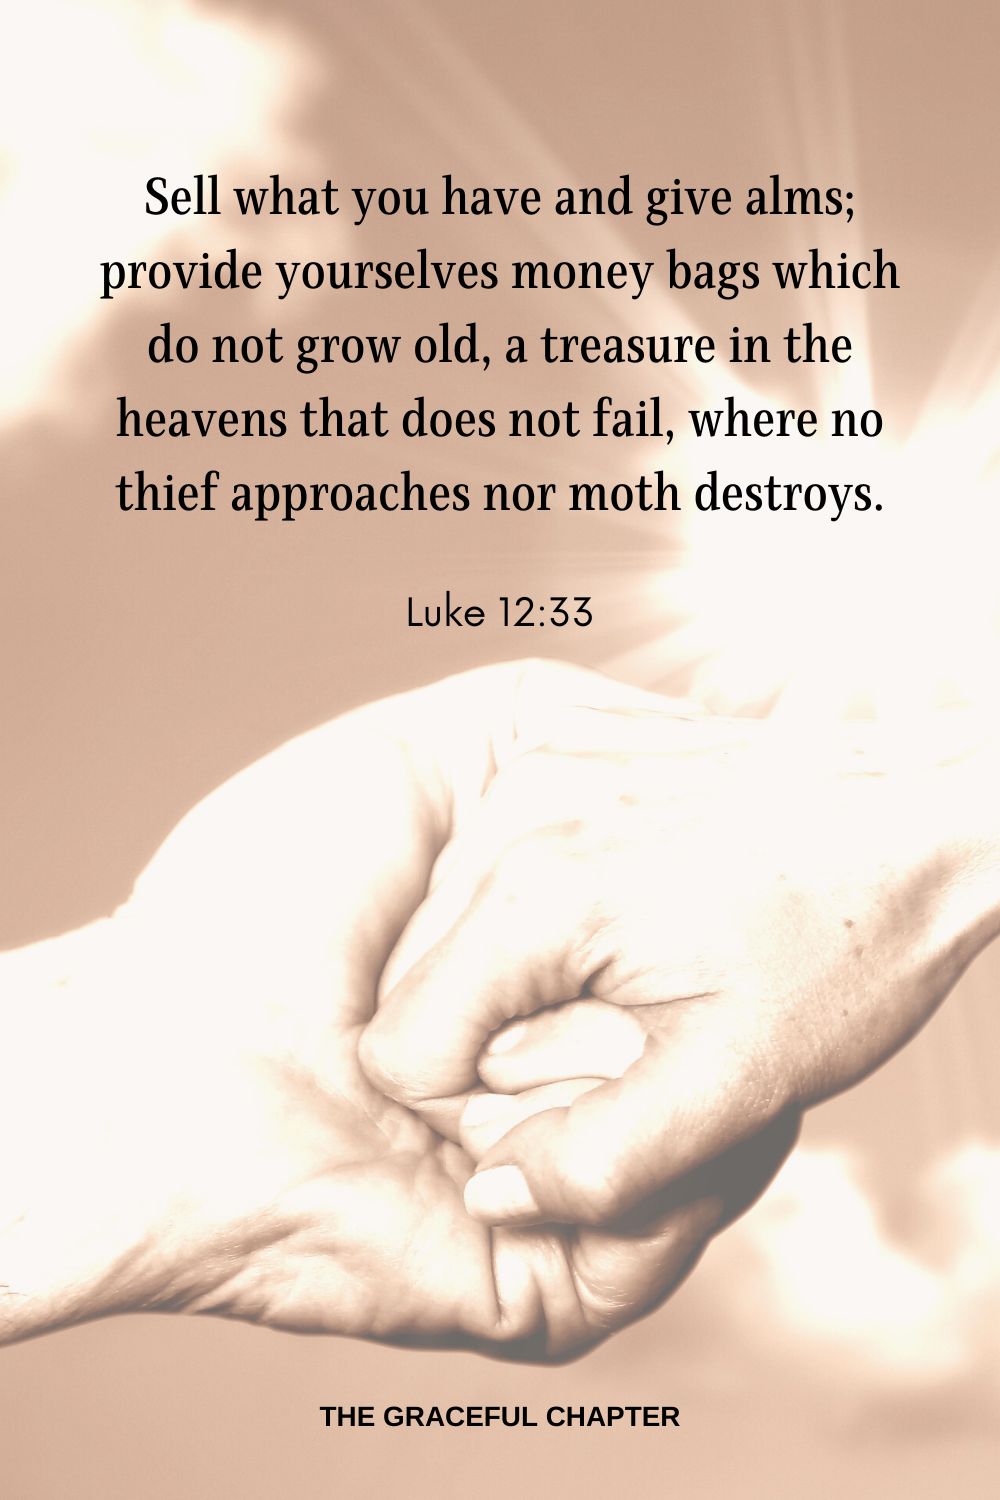 Sell what you have and give alms; provide yourselves money bags which do not grow old, a treasure in the heavens that does not fail, where no thief approaches nor moth destroys. Luke 12:33